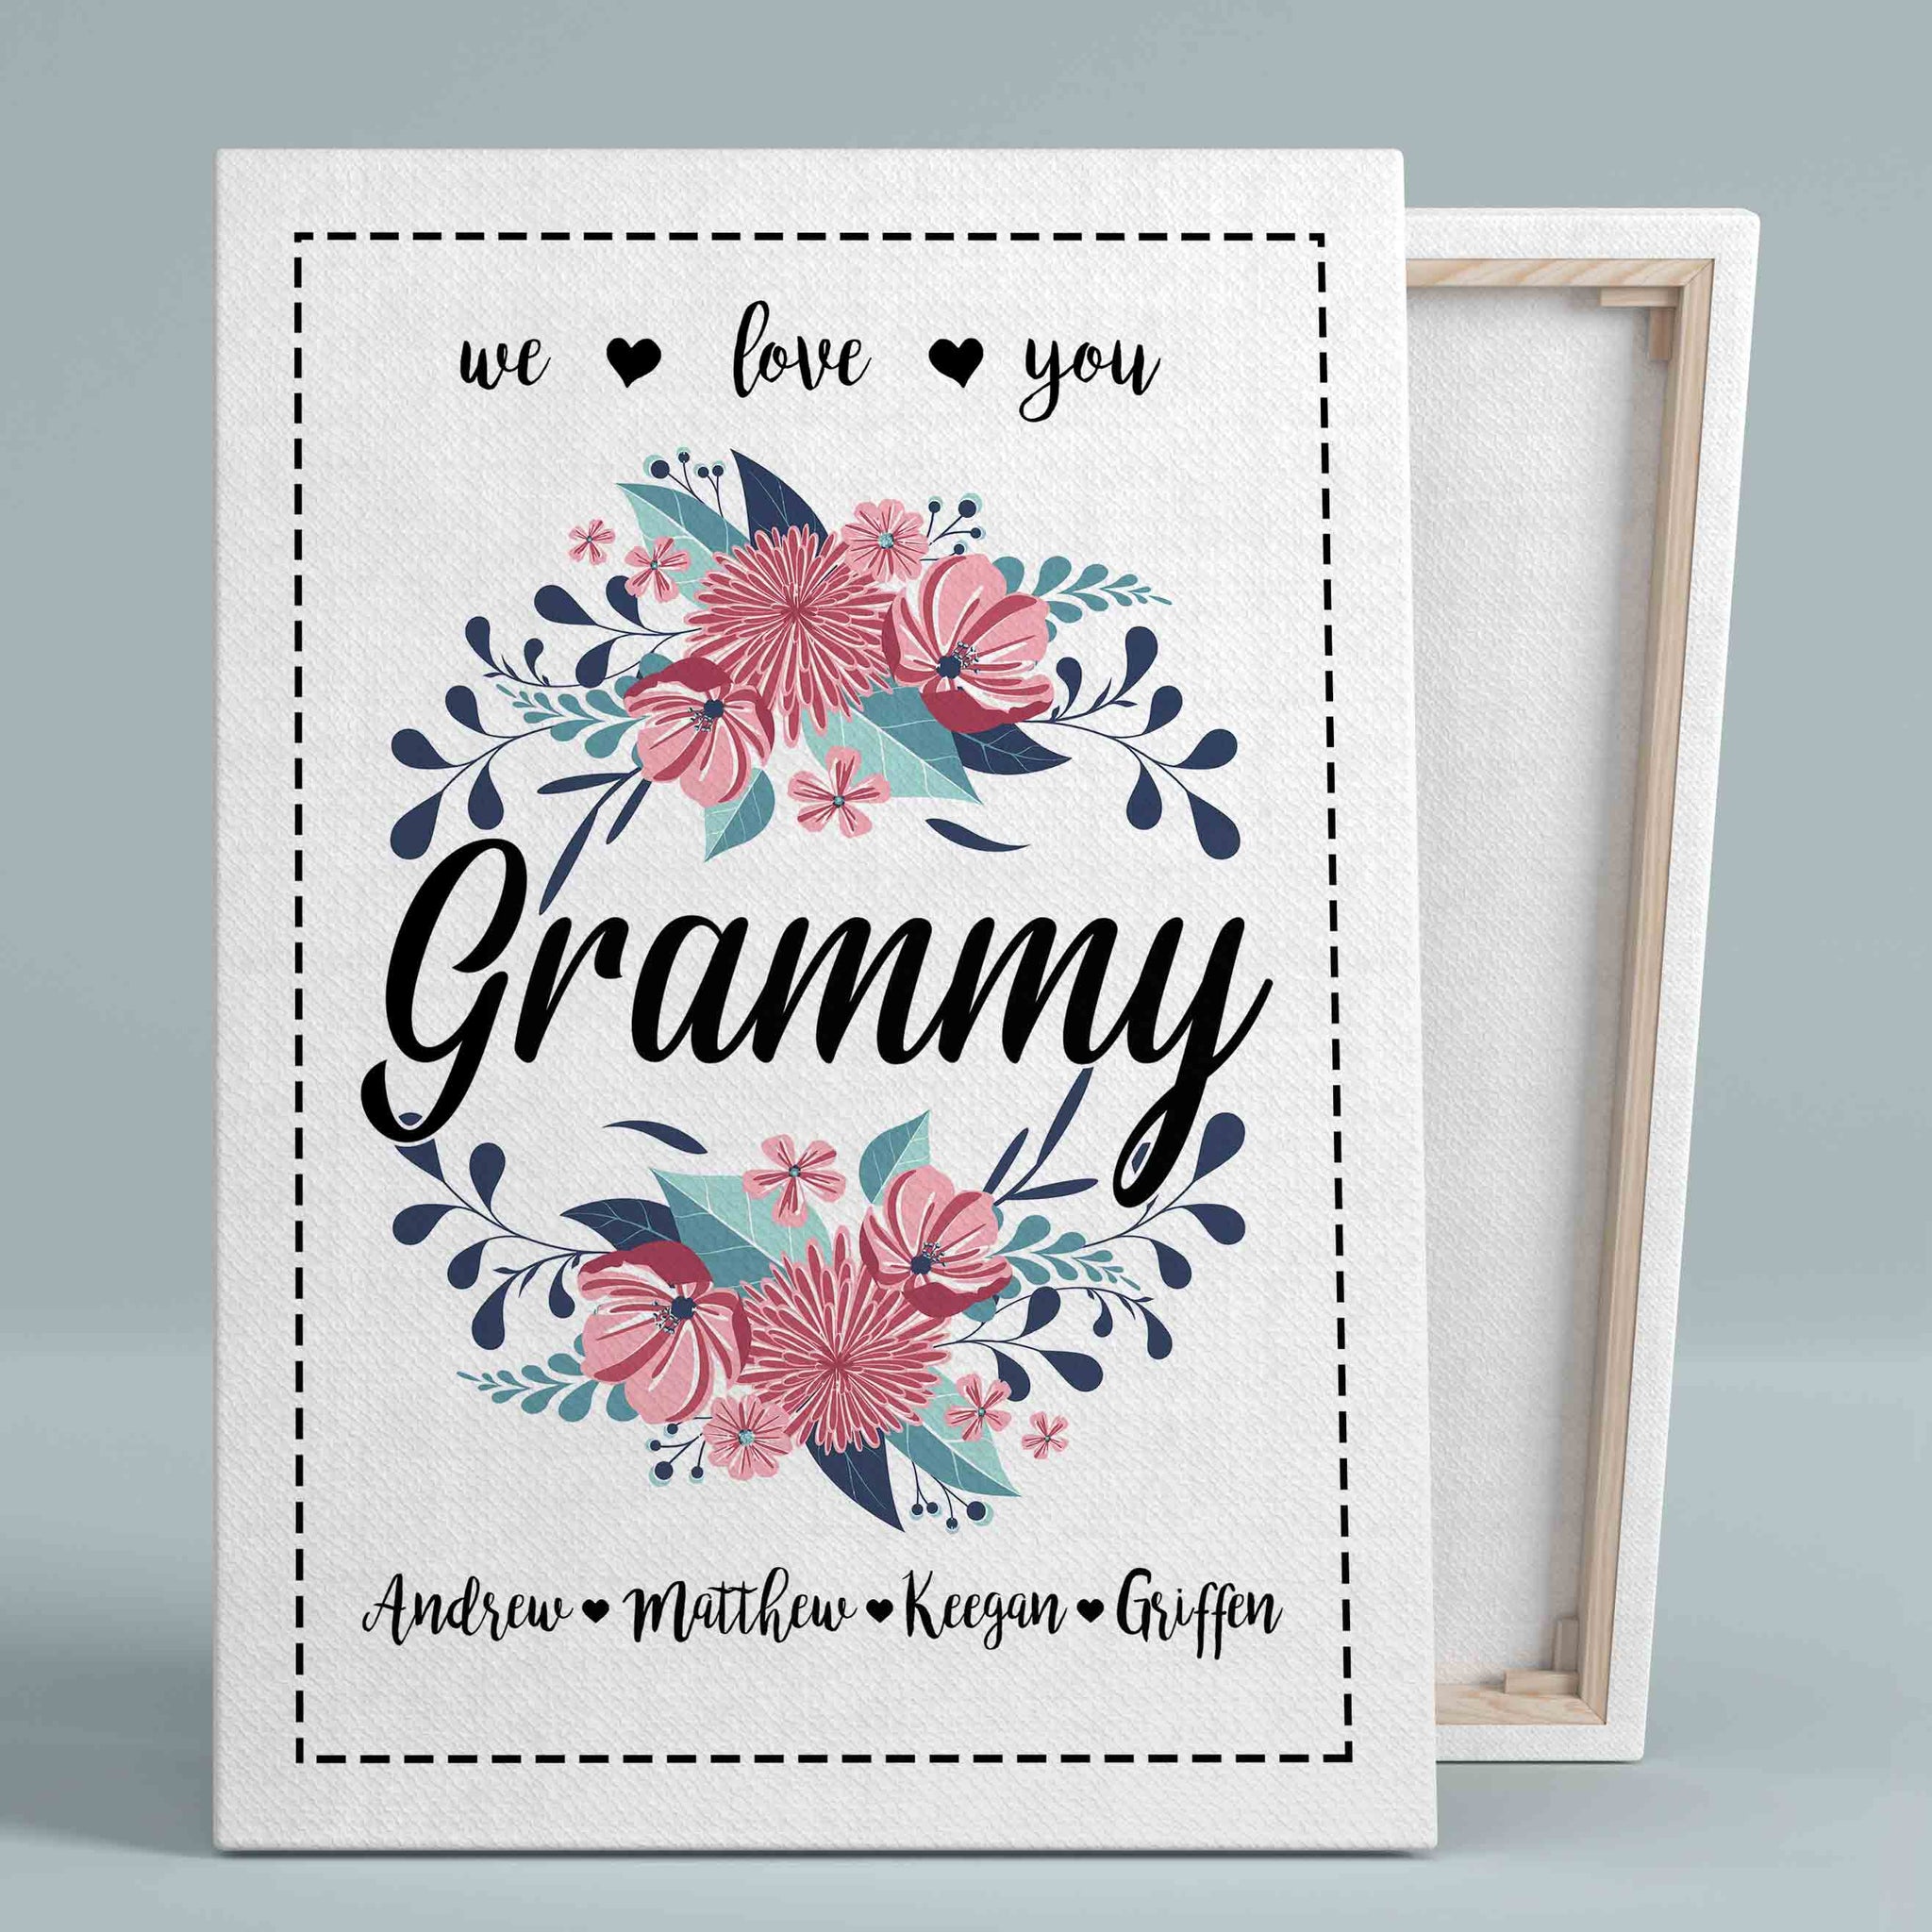 We Love You Grammy Canvas, Flower Canvas, Custom Name Canvas, Canvas Wall Art, Gift Canvas